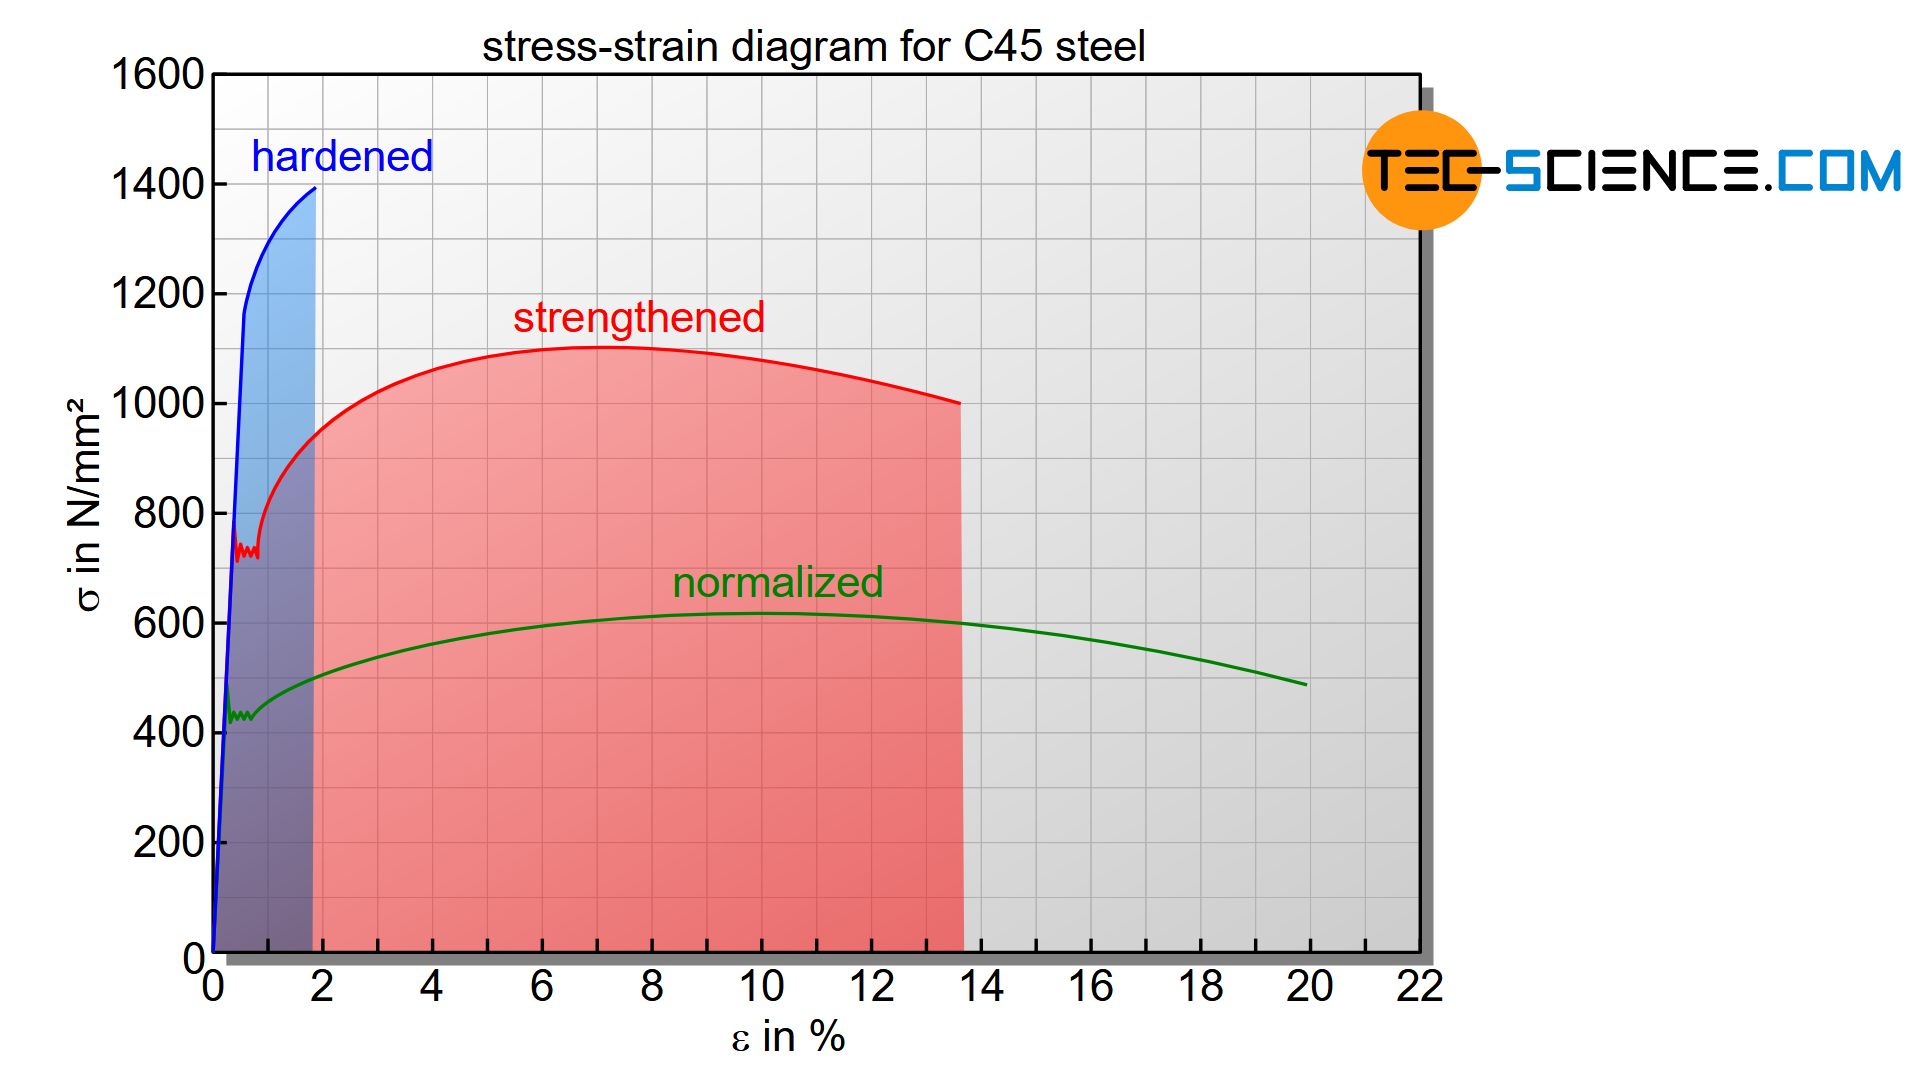 Stress-strain diagram of hardened, tempered and normalized steel C45